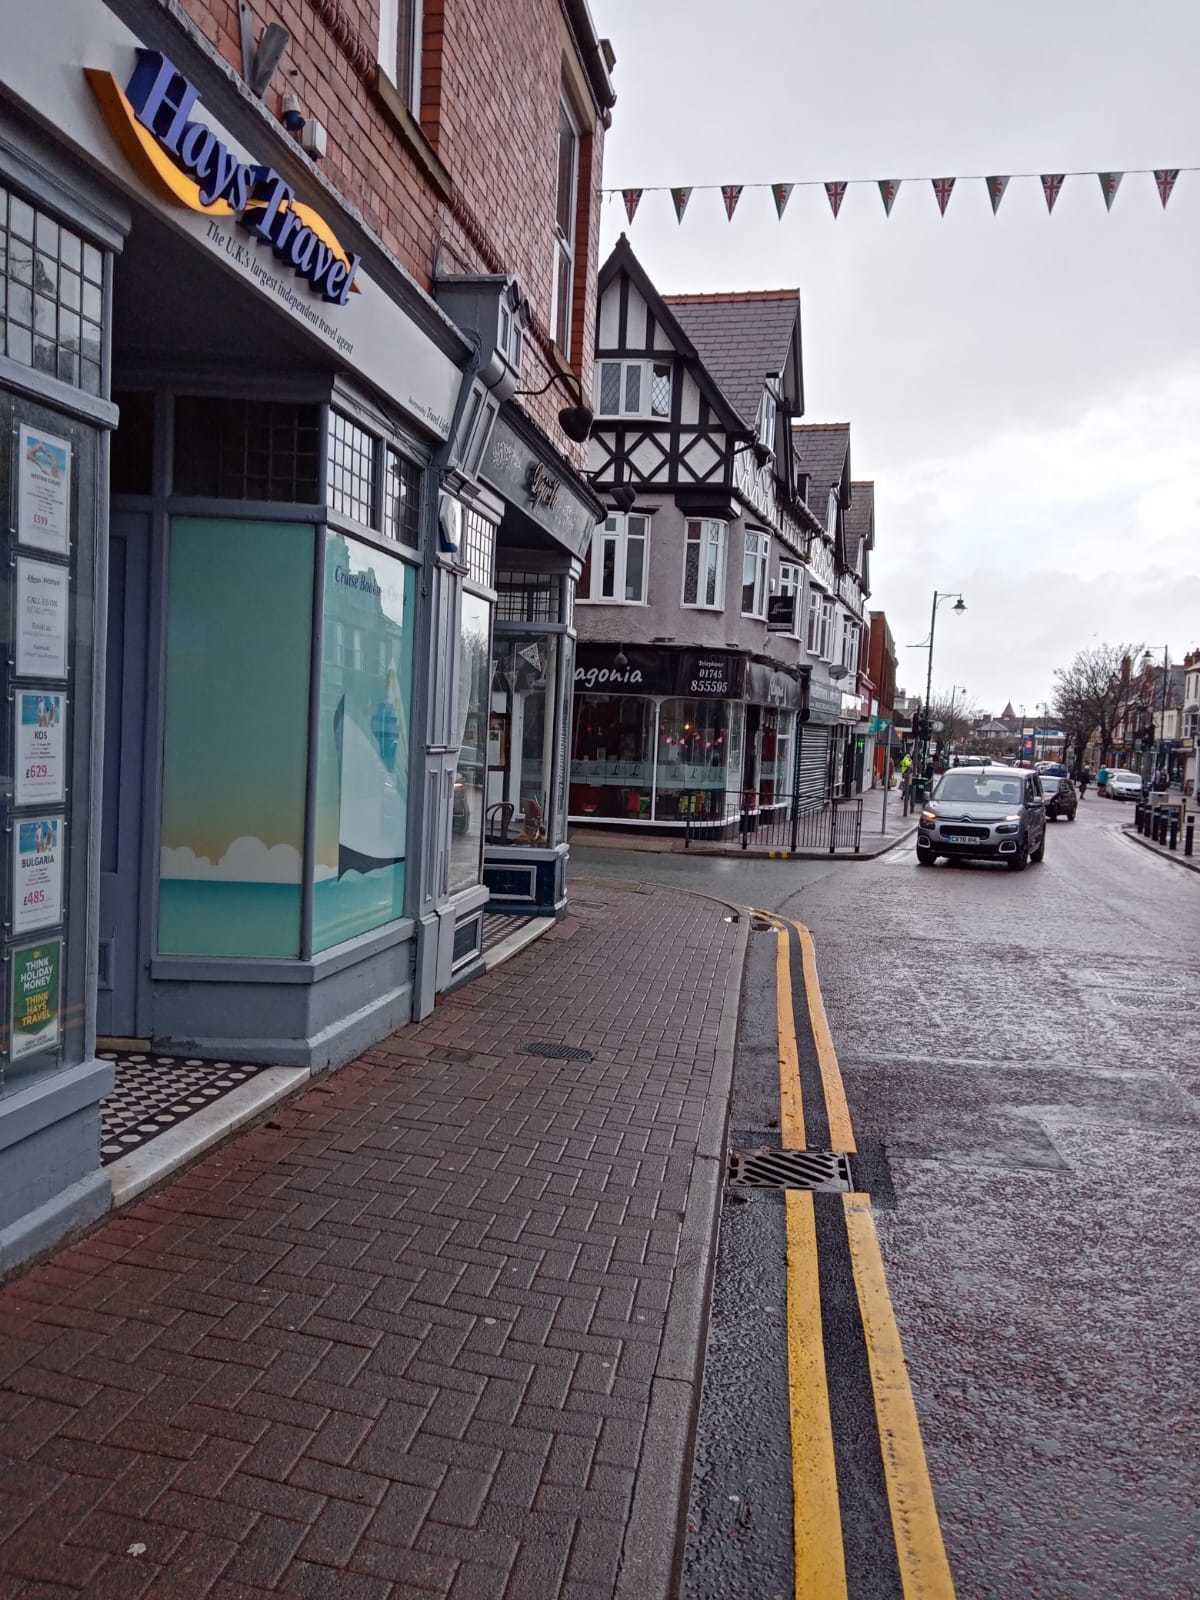 The parklet has been removed from the High Street in Prestatyn. Picture: Terry Canty